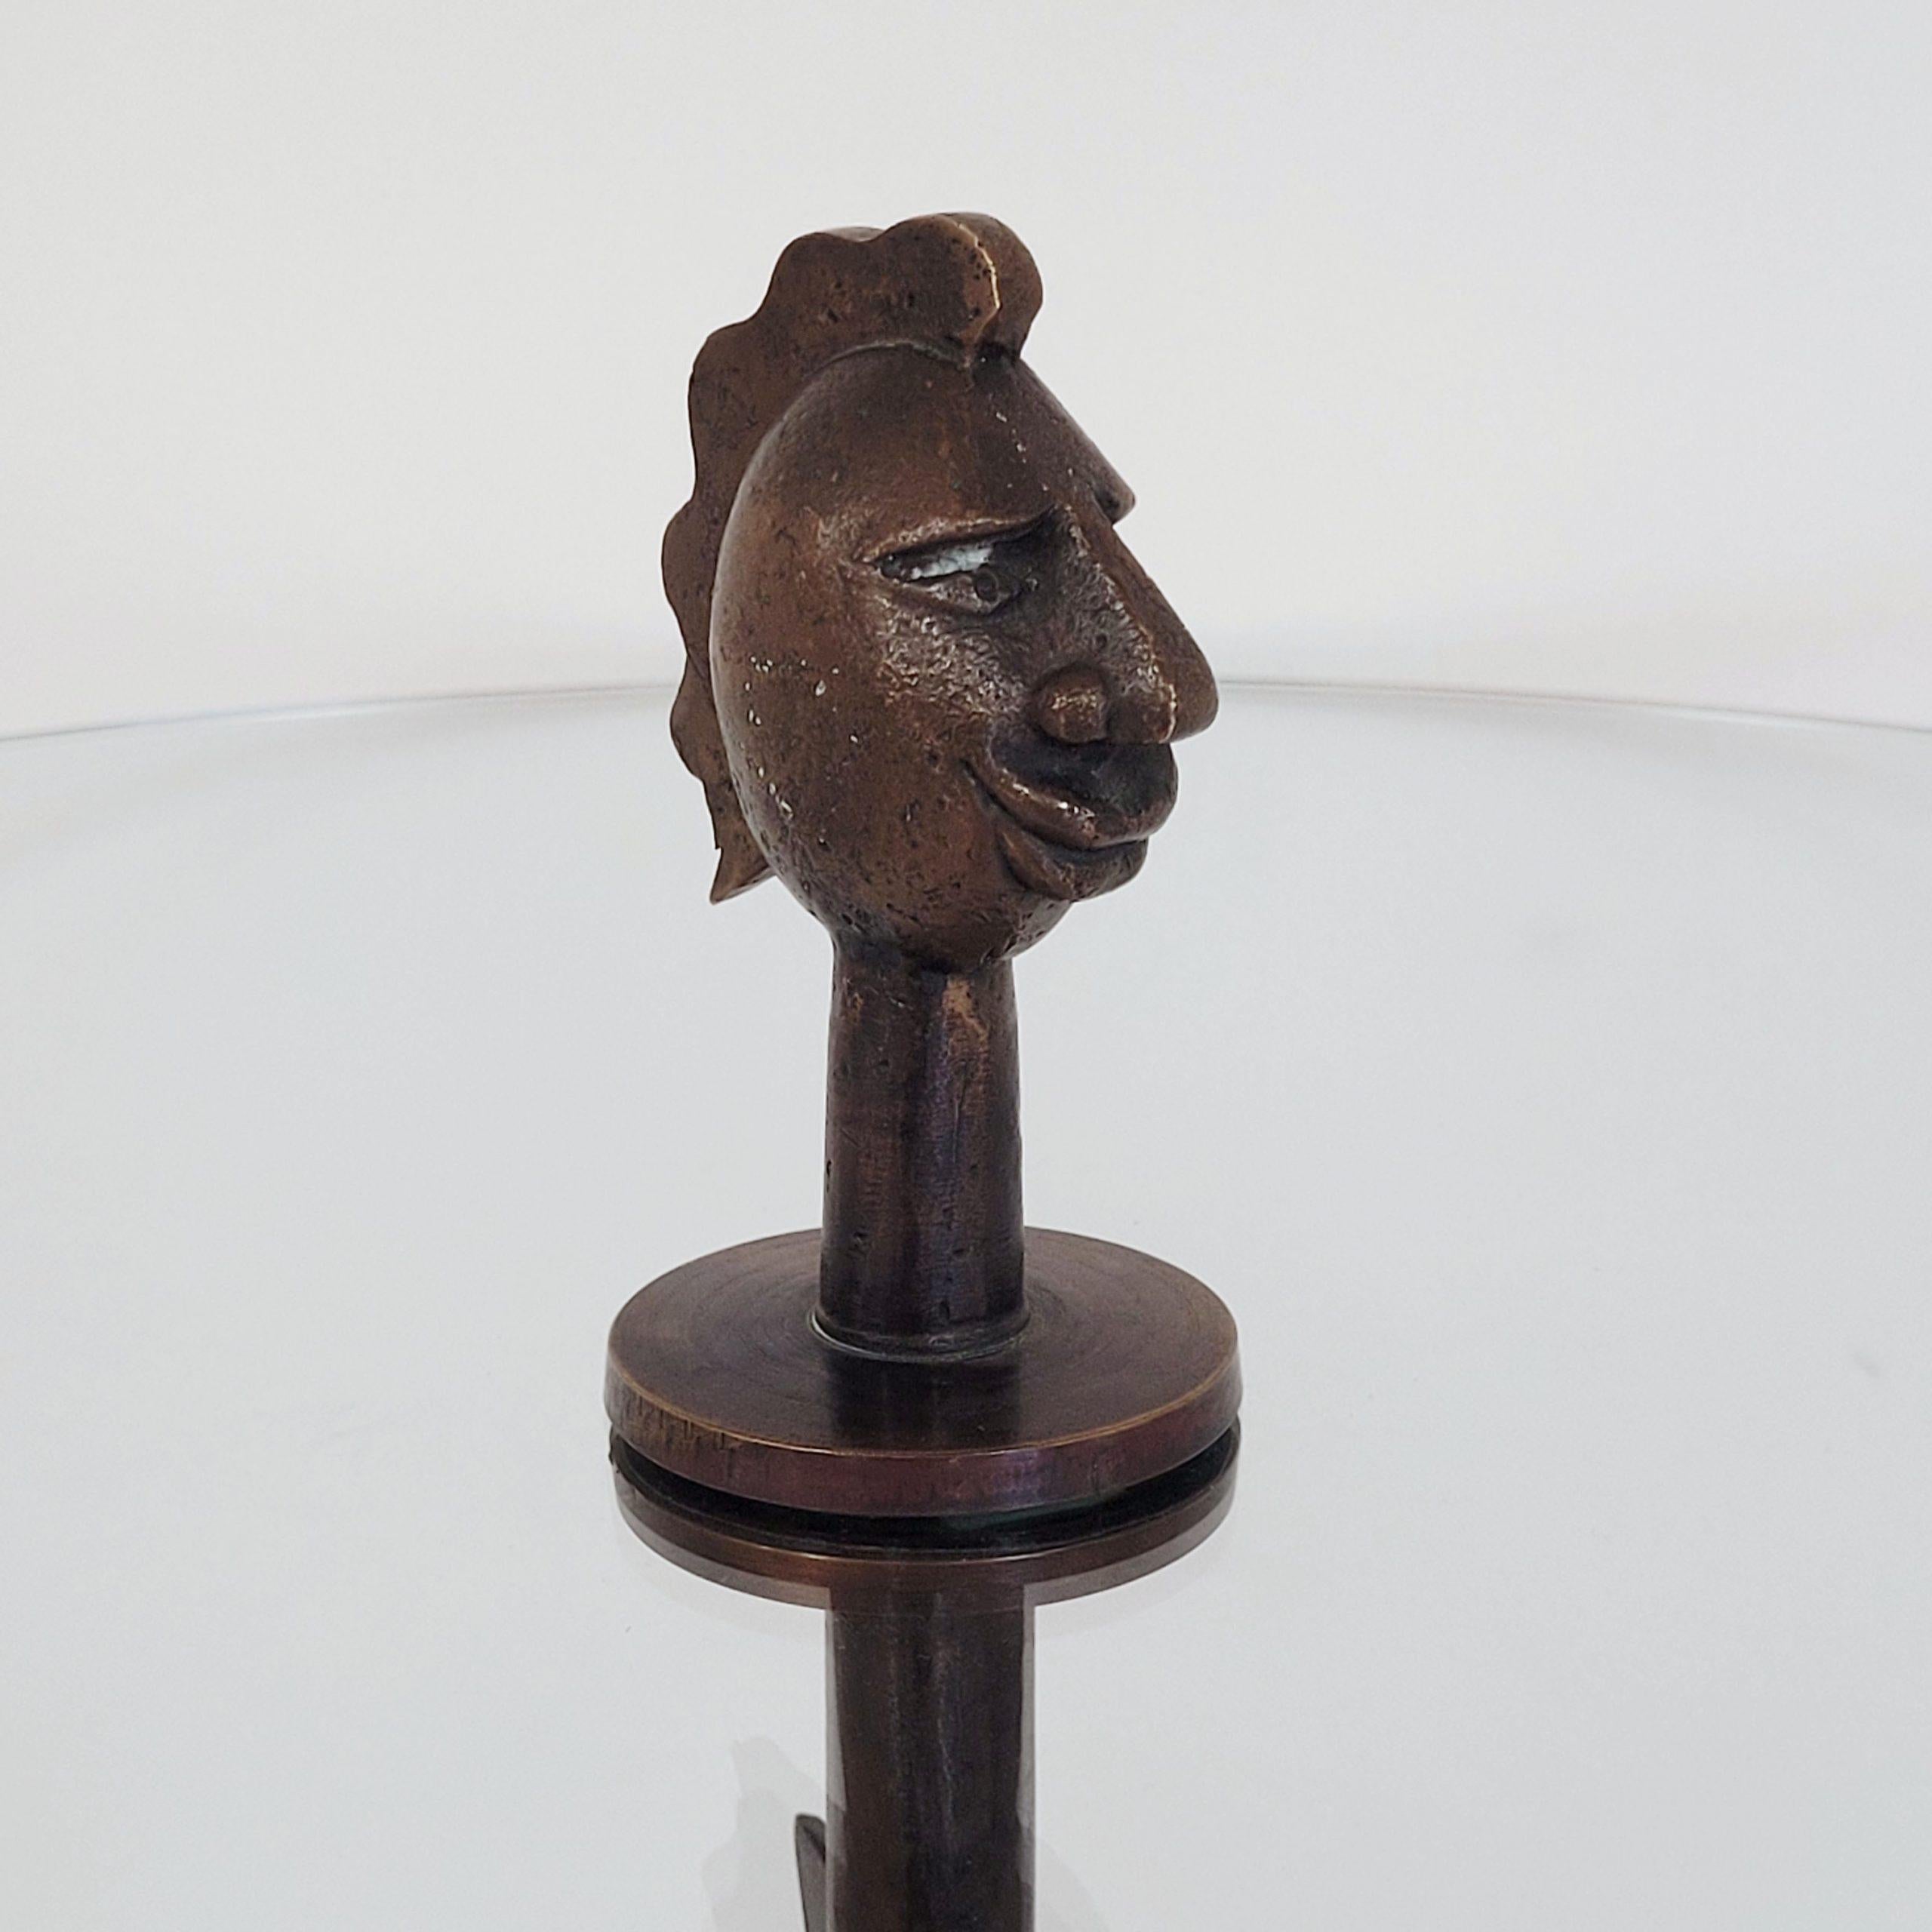 Rare round sidetable with bronze base and figurative end of an expressive head.
The table was made in Italy in the 60´s/ 70´s.
It is probably a unique piece, which was commissioned by the customer.
The bronze head is screwed on.
The glass top is